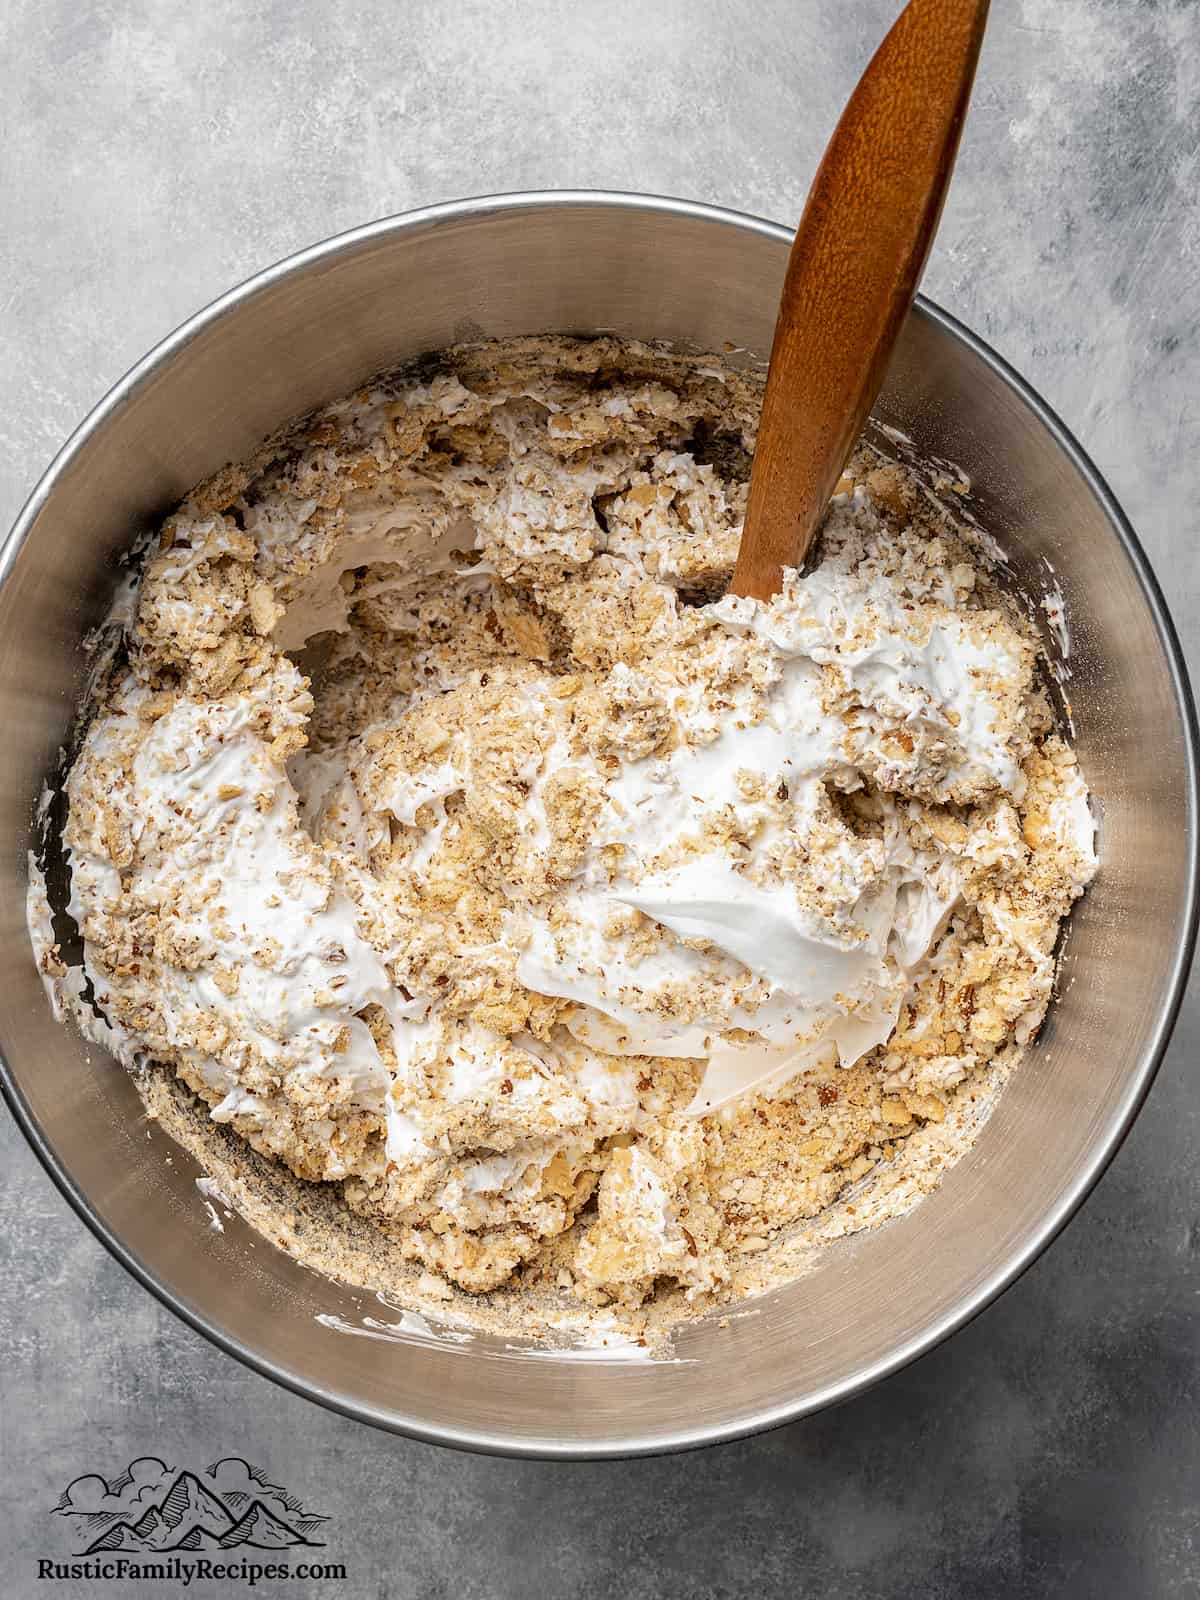 Folding crushed Maria cookies into meringue in a stand mixer bowl